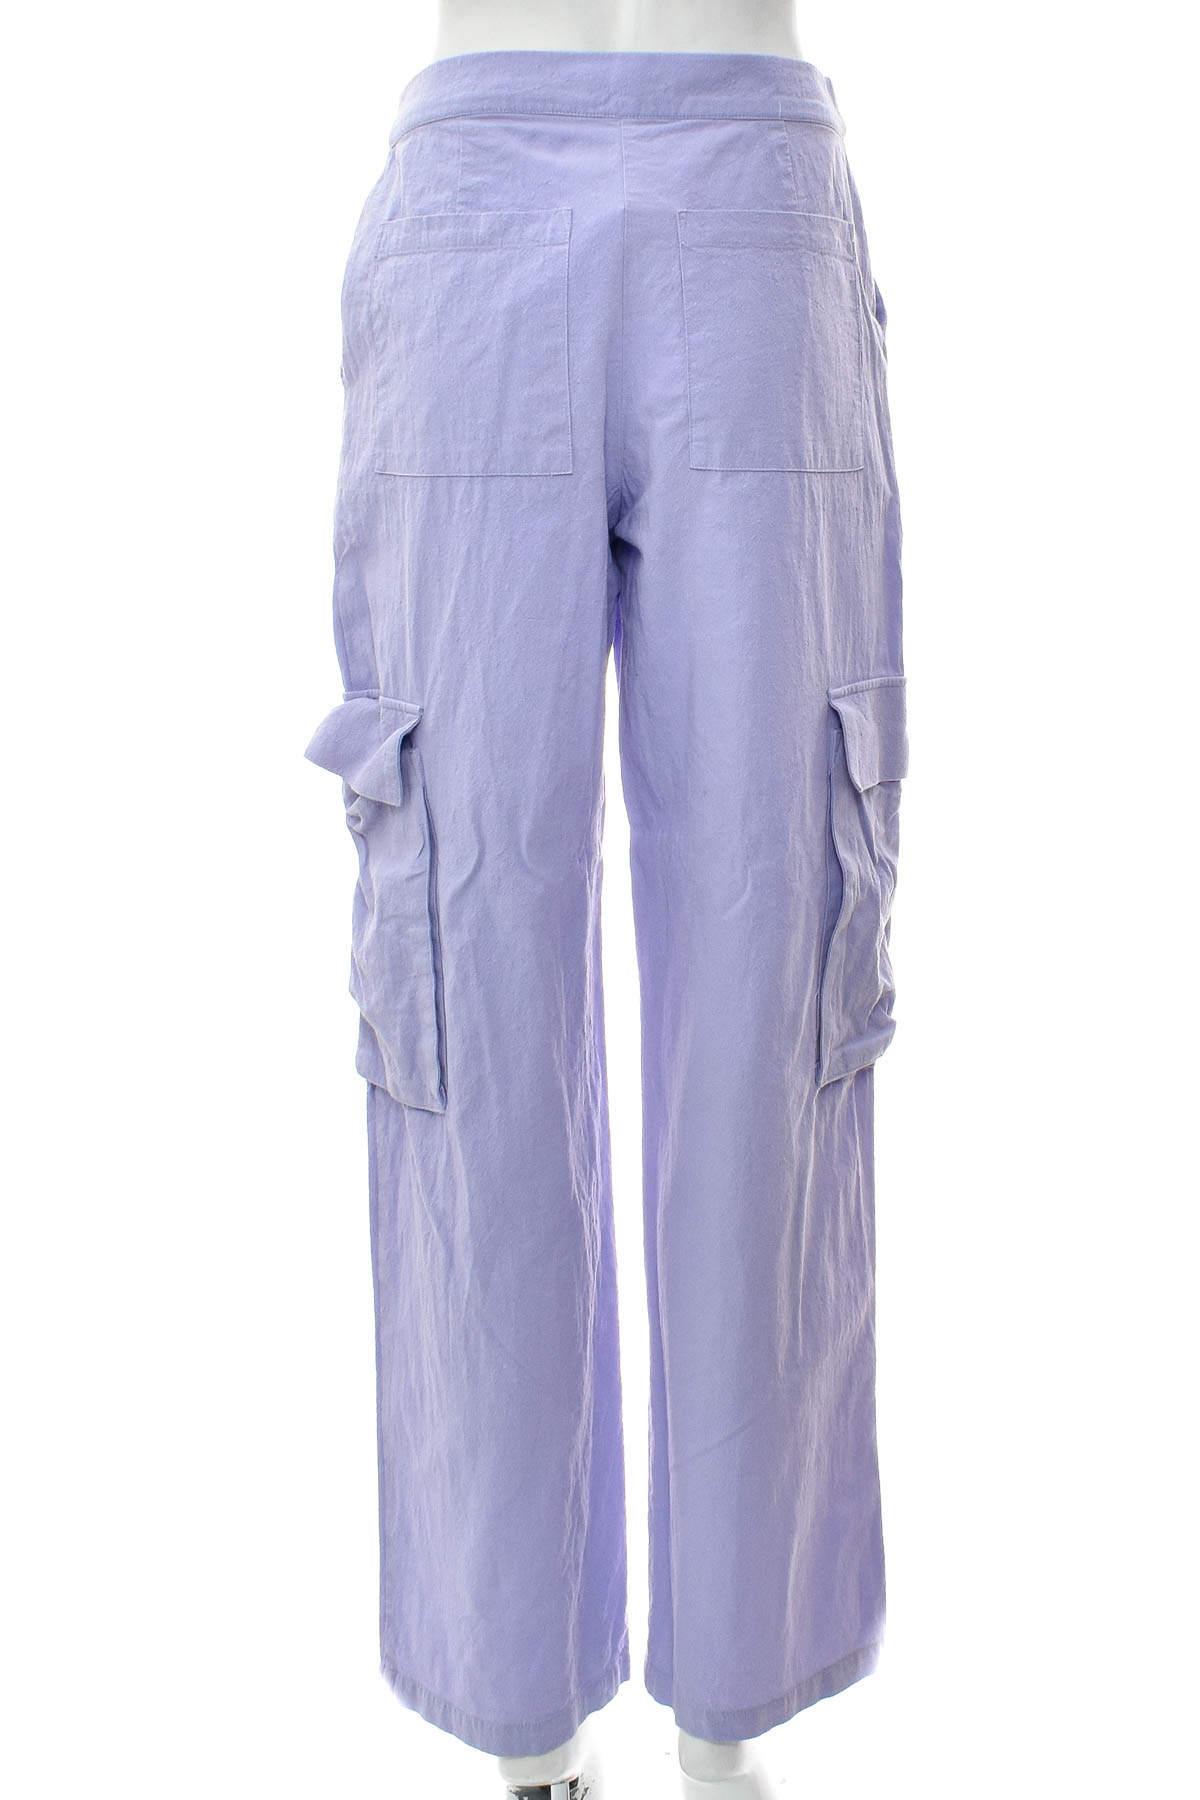 Women's trousers - EDITED - 1